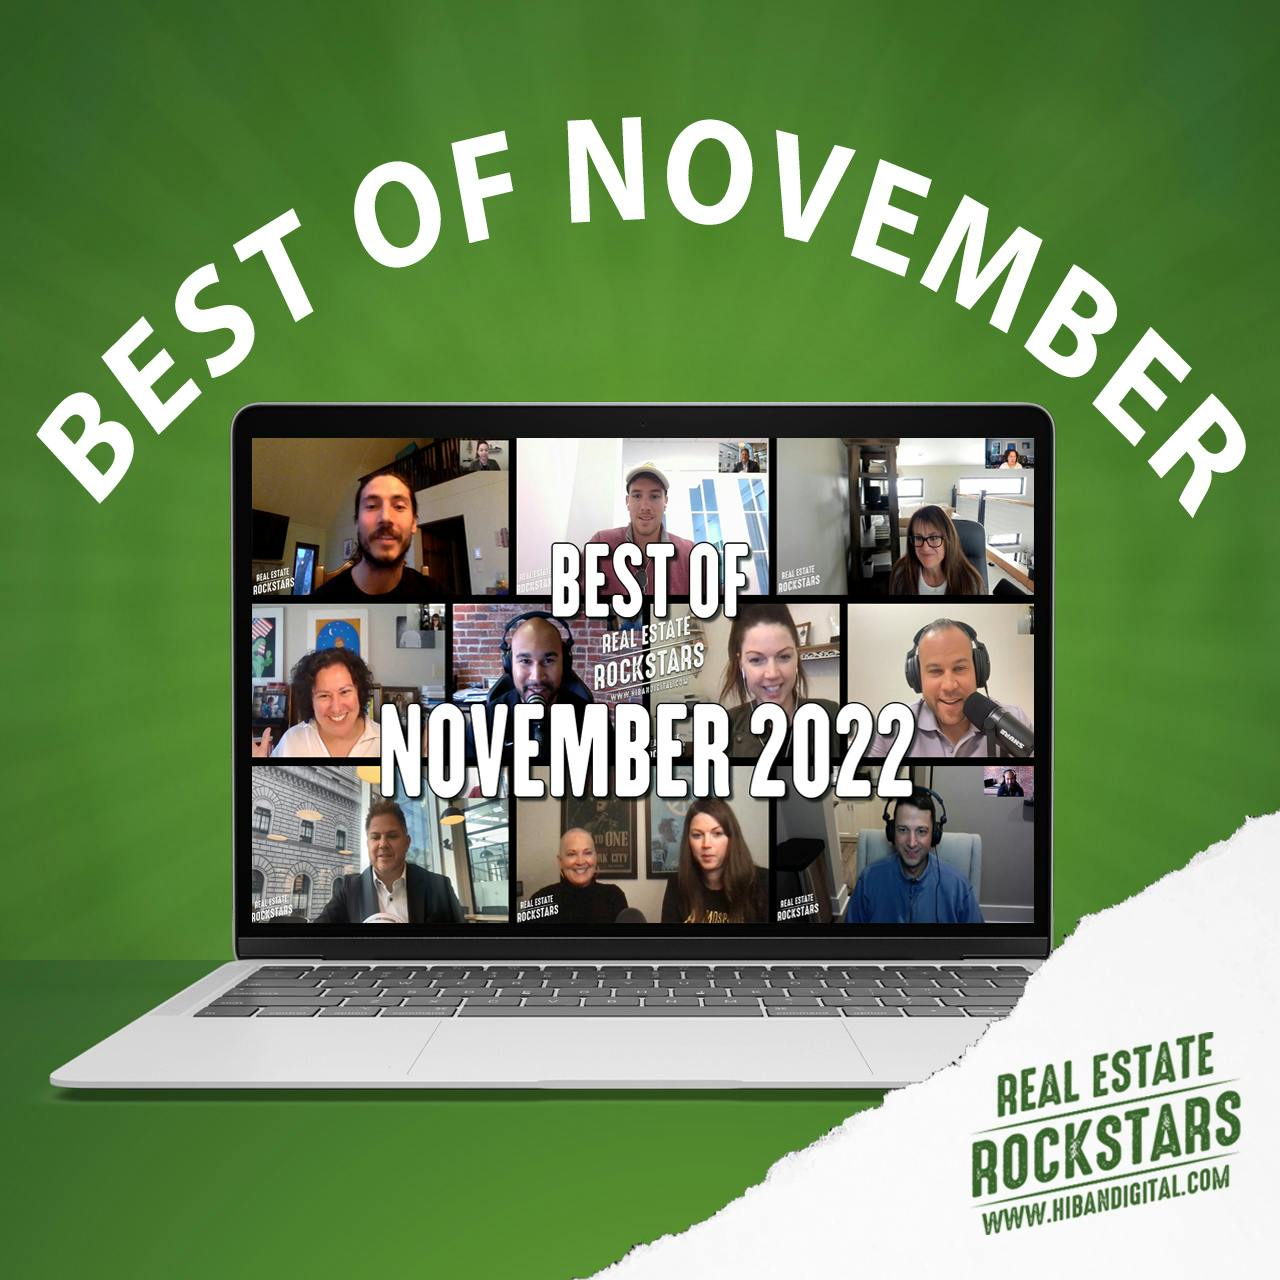 1101: RERR Highlights – The Best Real Estate Podcast Clips of November 2022